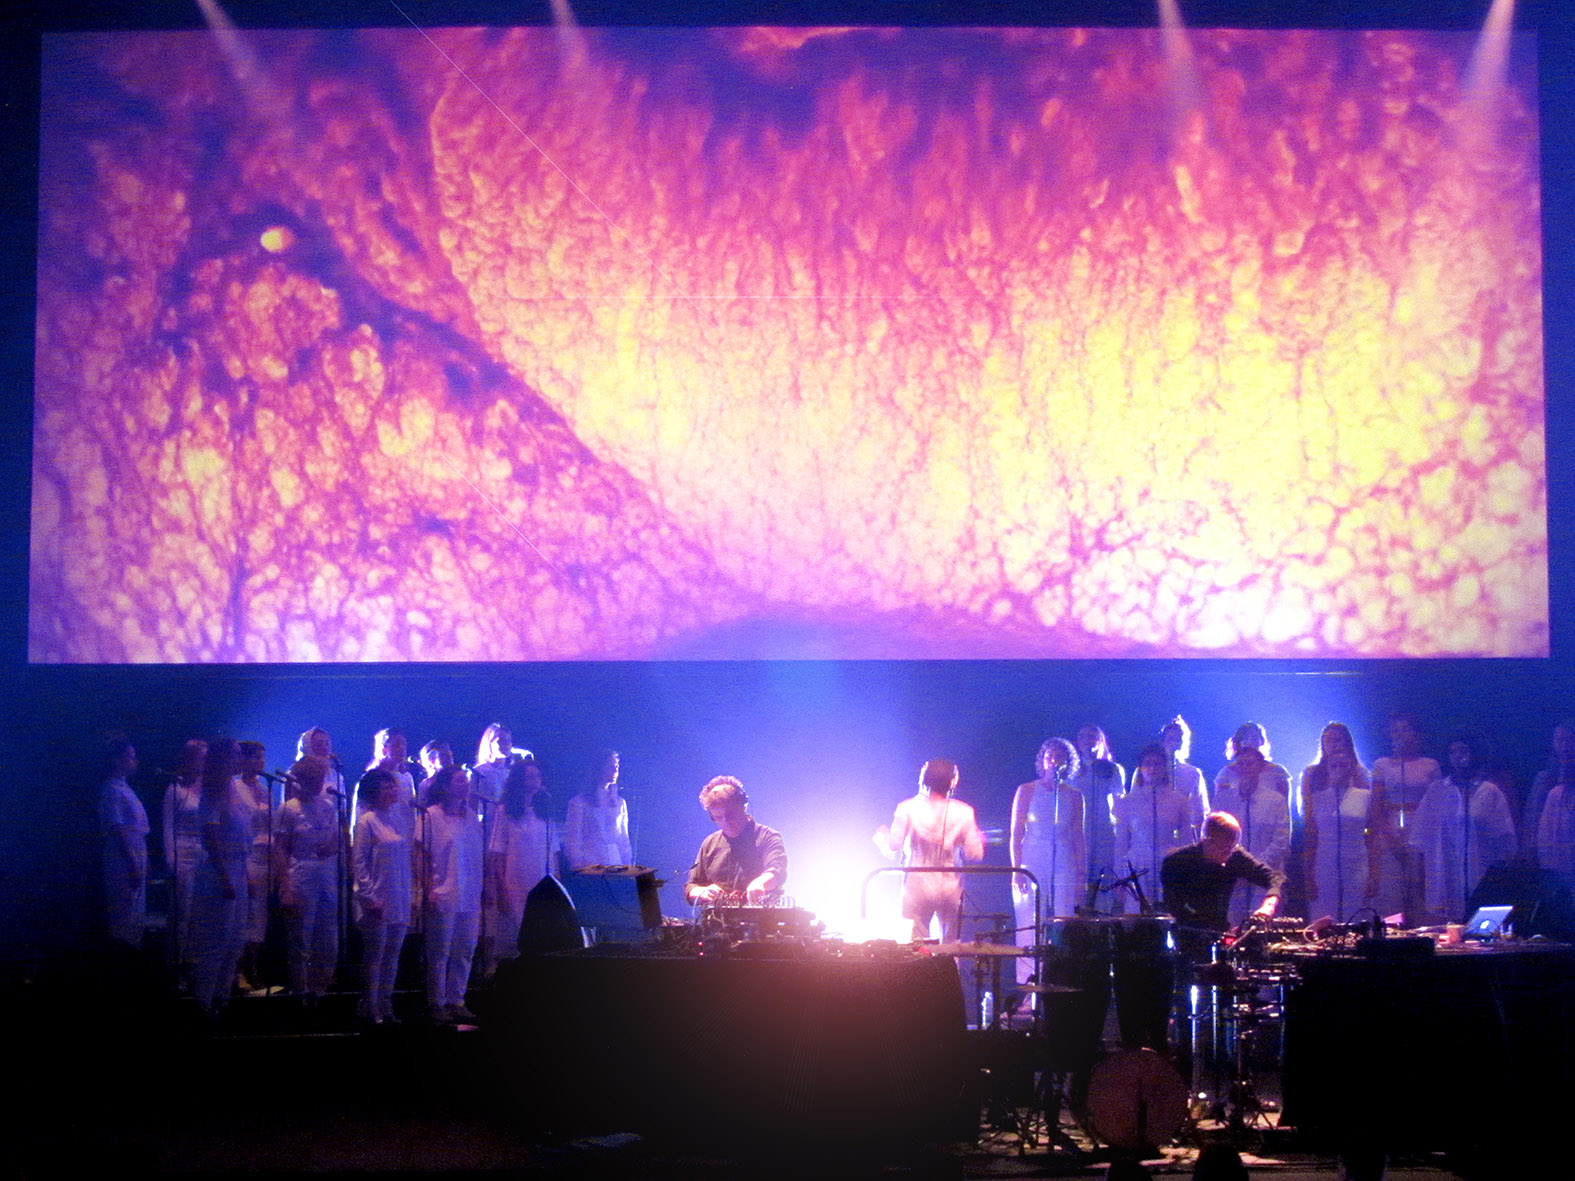 Two DJs perform in front of an all-female choir. Behind them is an abstract image projection.